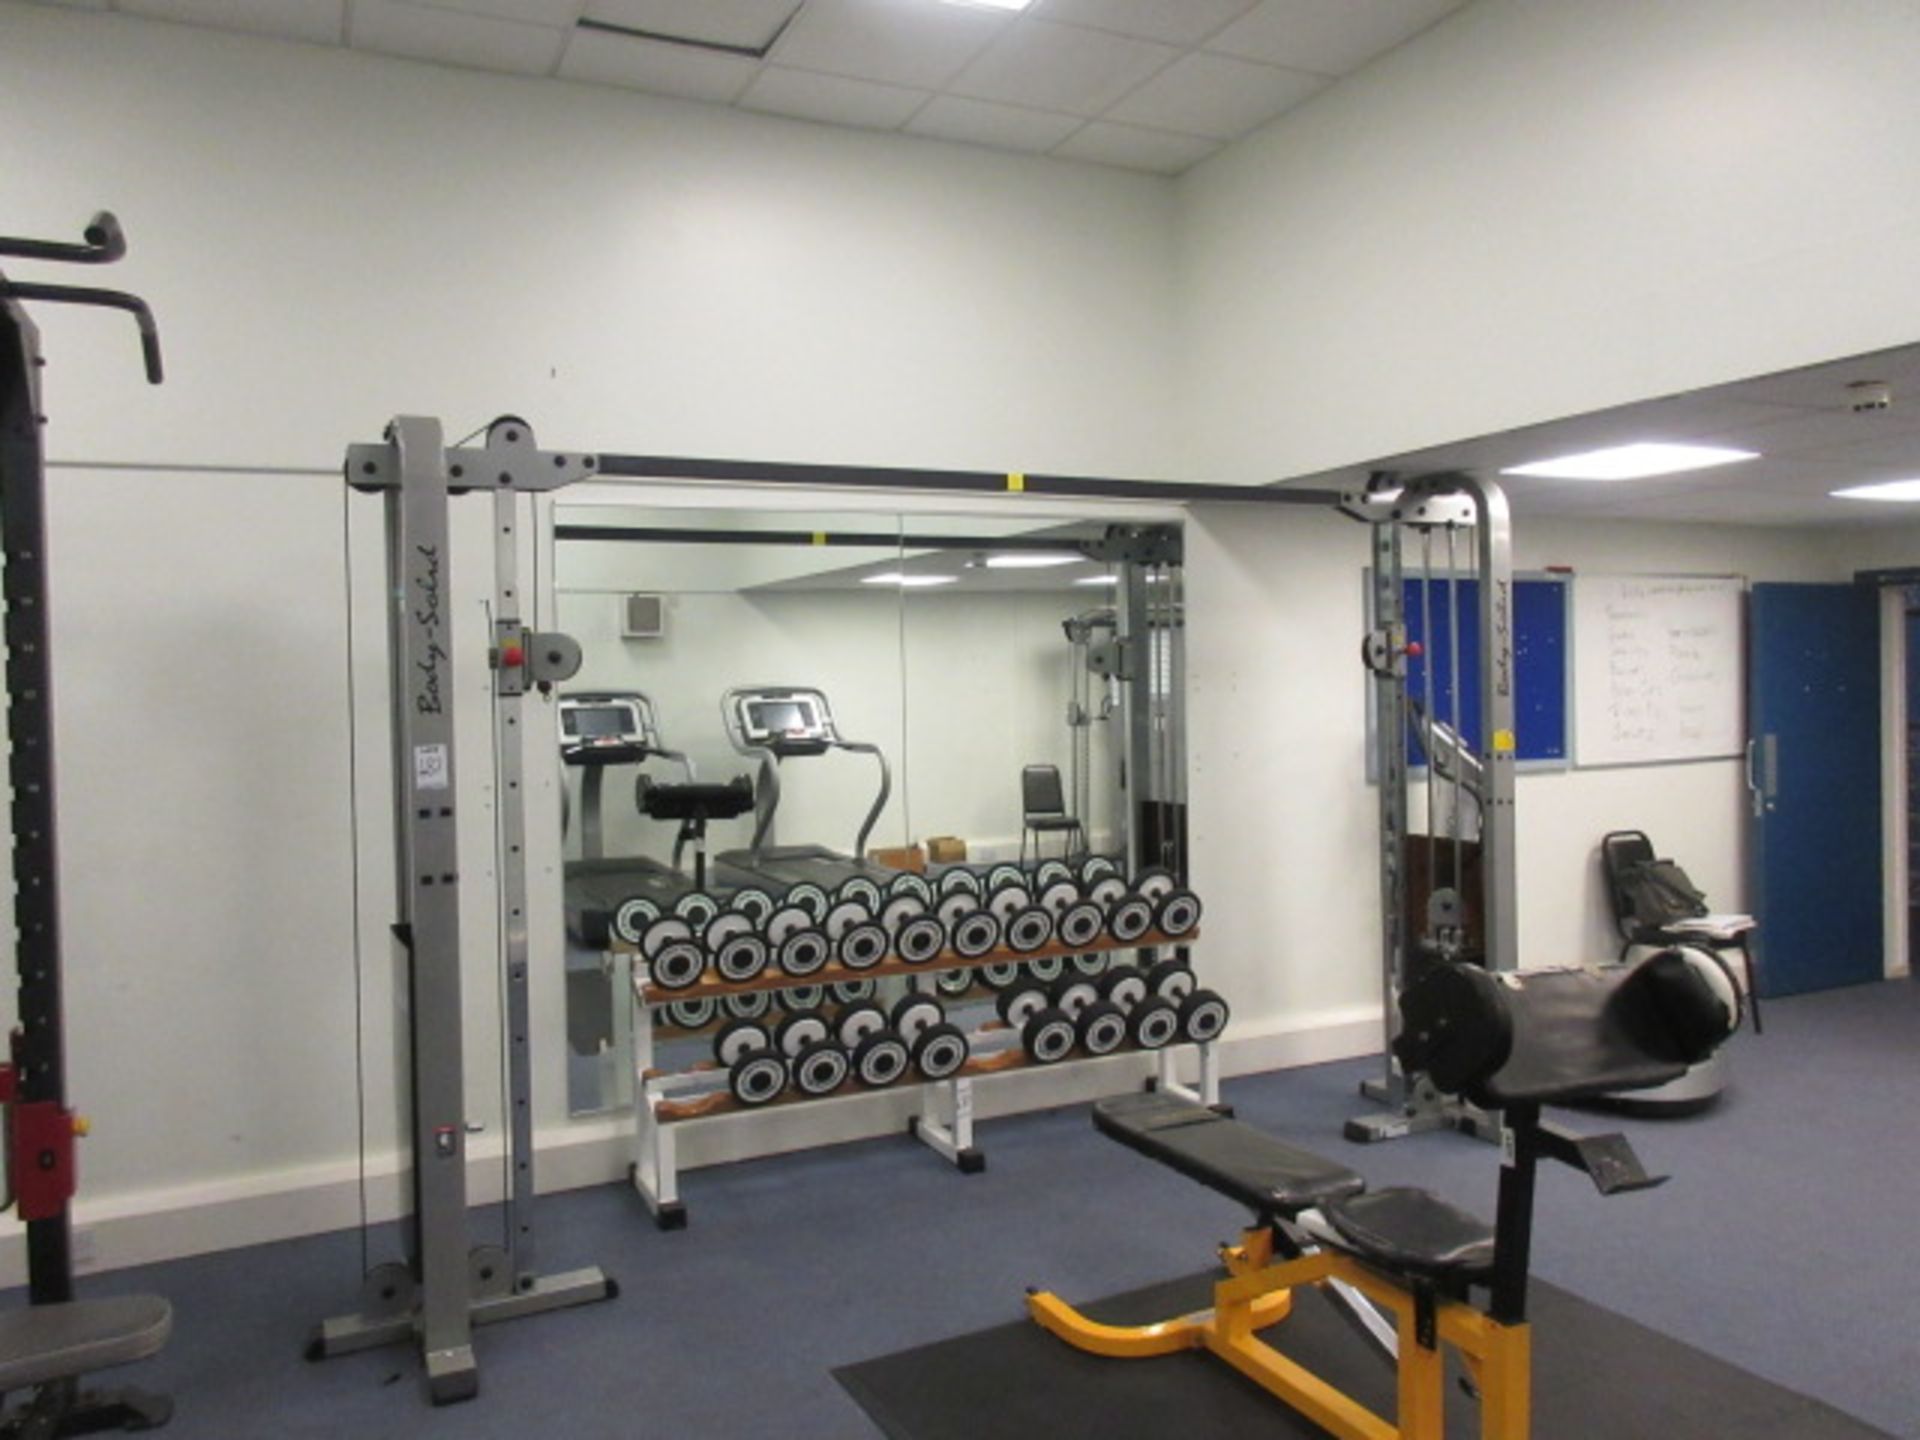 Bodysolid Pull Down Lat Work Out Frame. 1-16 kg weights on each side. Note no handles Townholm